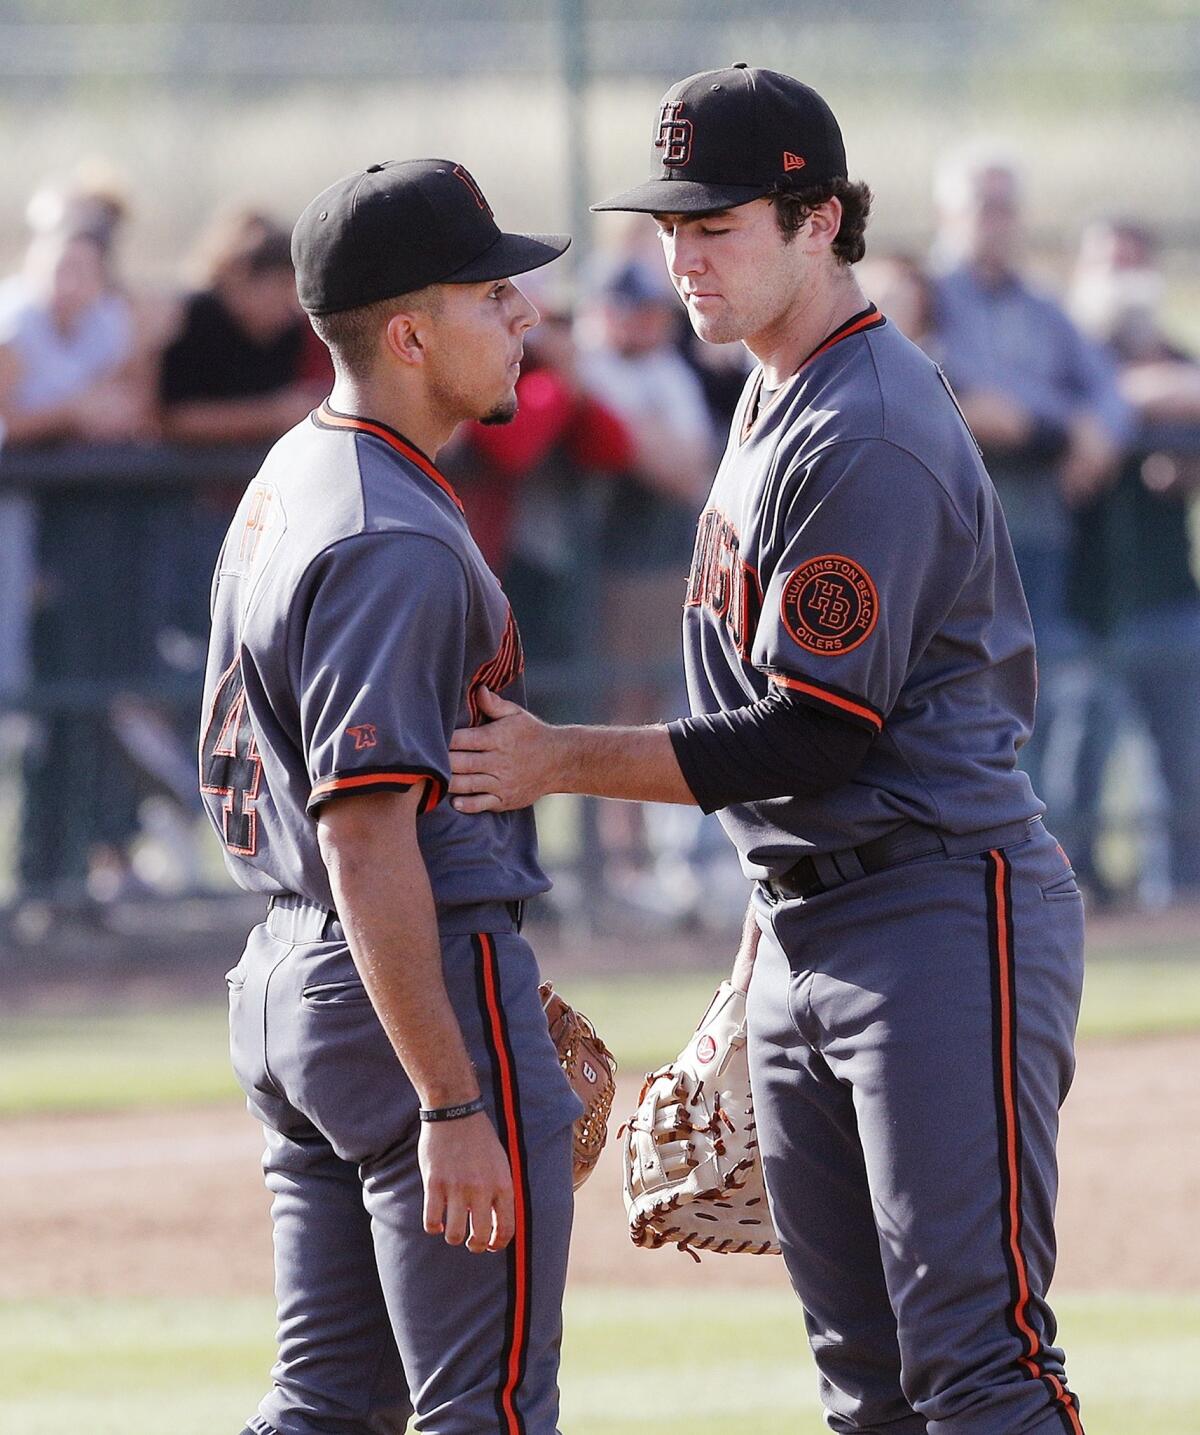 Huntington Beach High's Josh Hahn, right, consoles reliever Edward Pelc after Studio City Harvard-Westlake scored four runs in the sixth inning of a CIF Southern Section Division 1 semifinal playoff game on Tuesday.